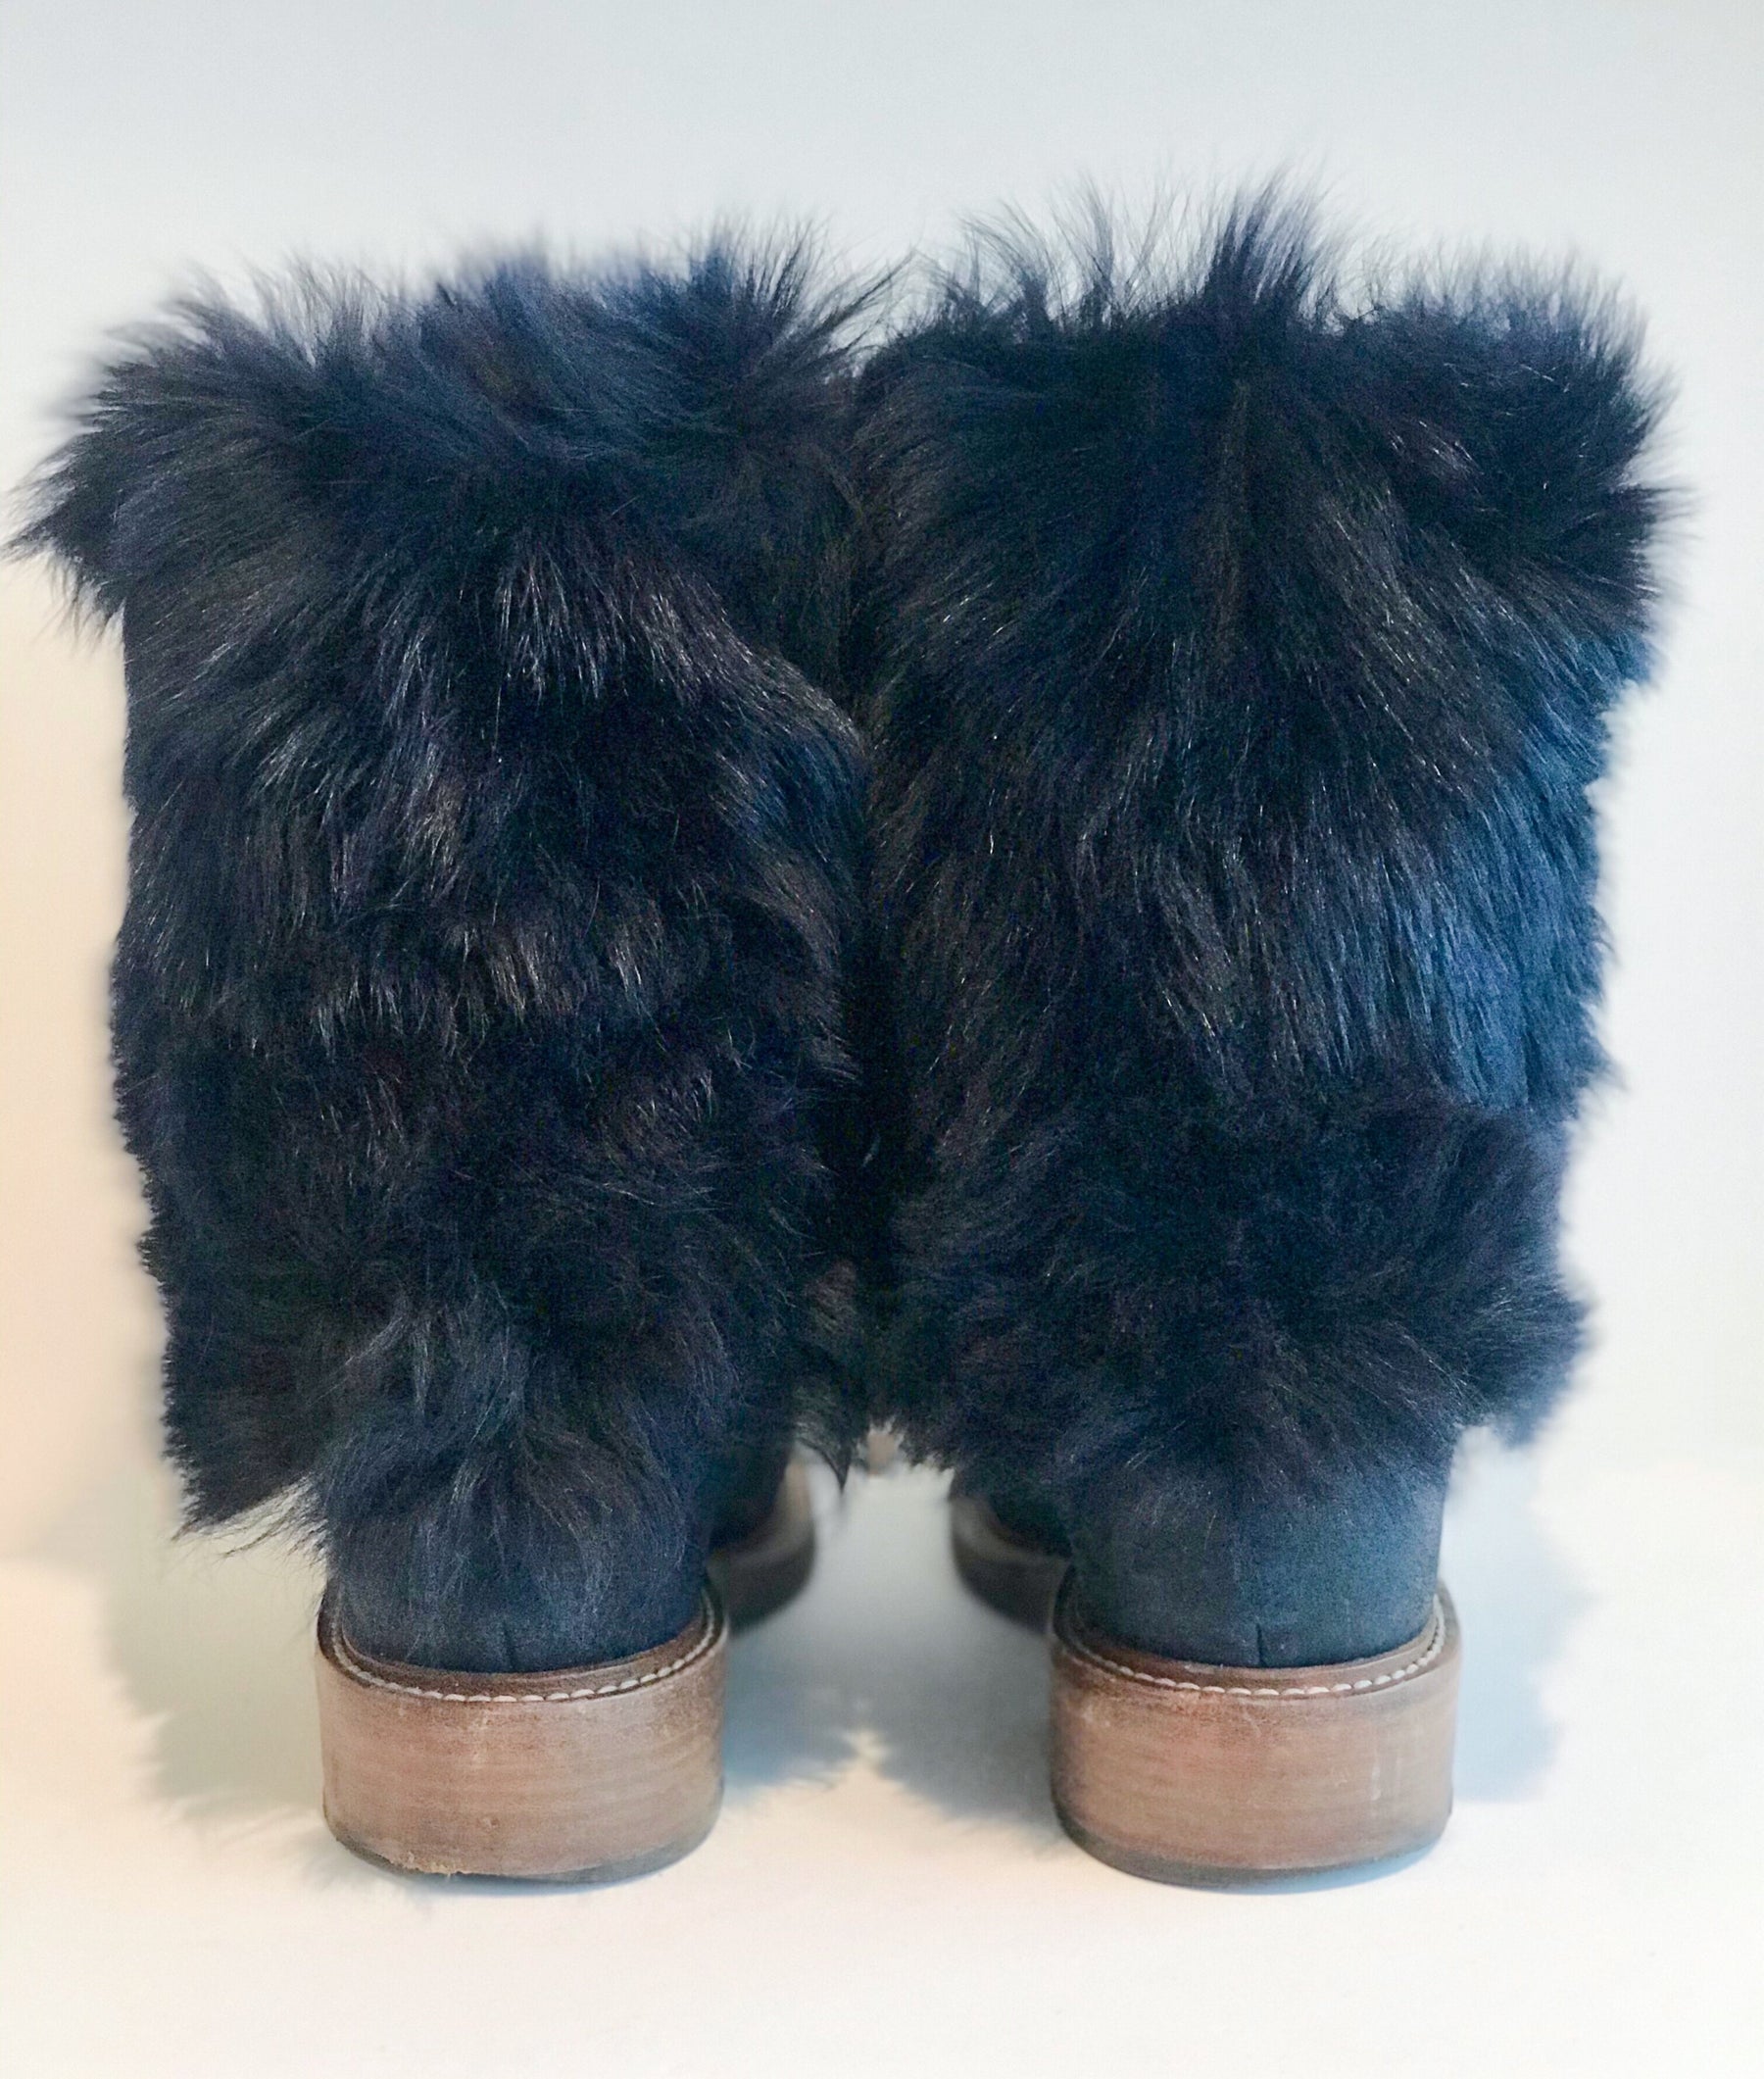 Chanel Fur Boots Navy Blue Back of Shoes